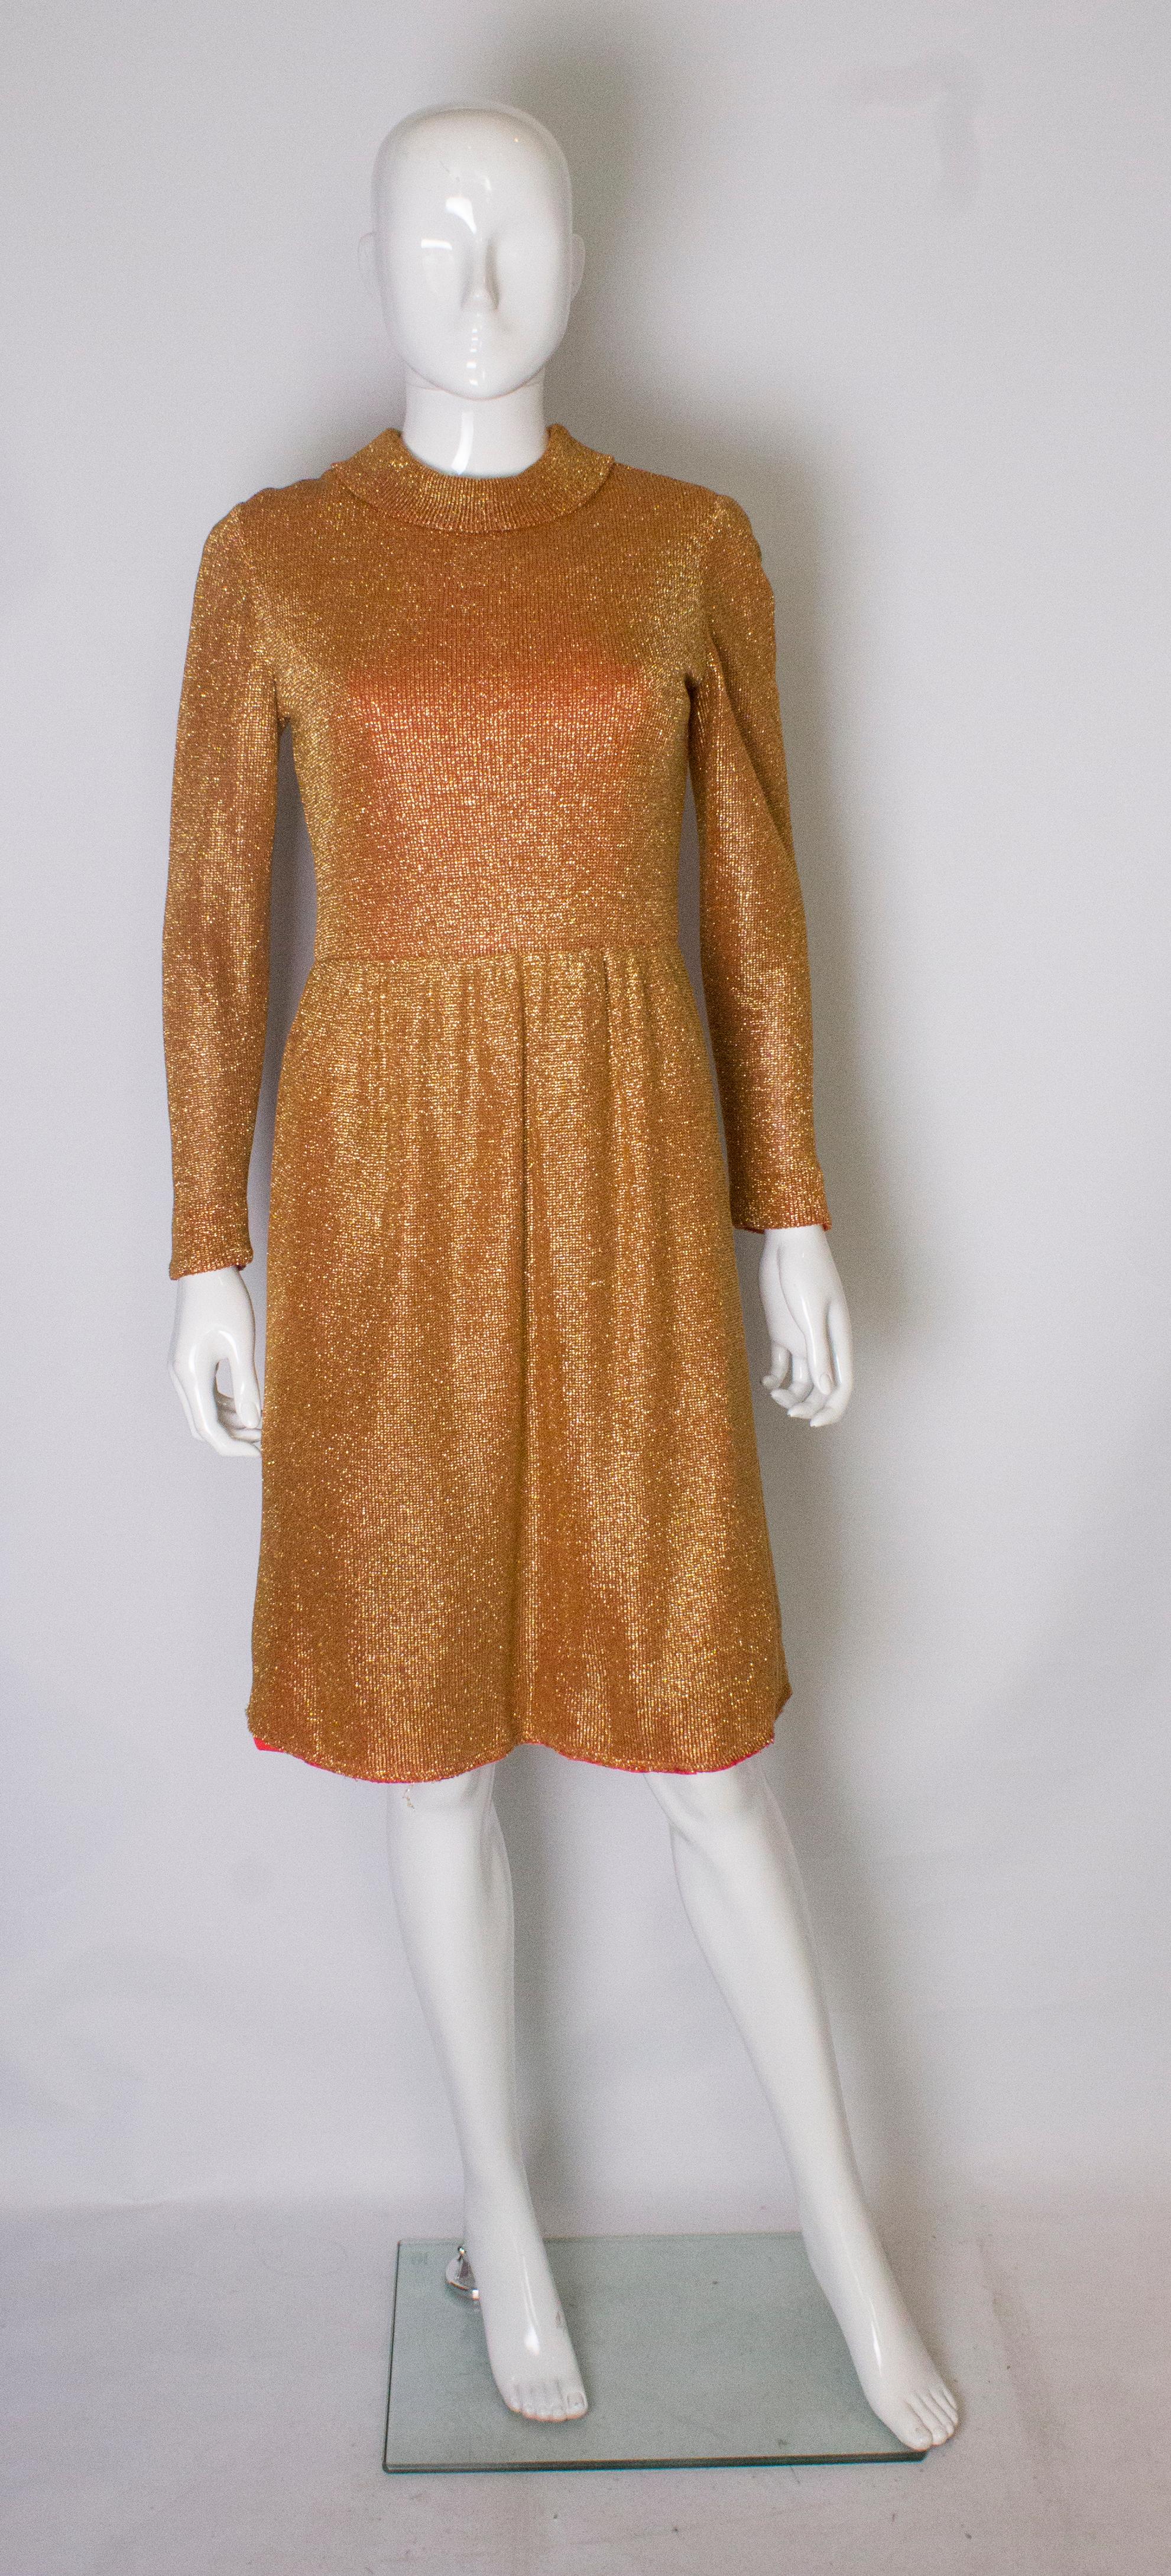 A real head turner , this dress is in a wonderful autumn/fall  gold colour, and lined in red. The dress  has a roll collar, gathering at the waist, a central back zip and ribbing at the cuffs.